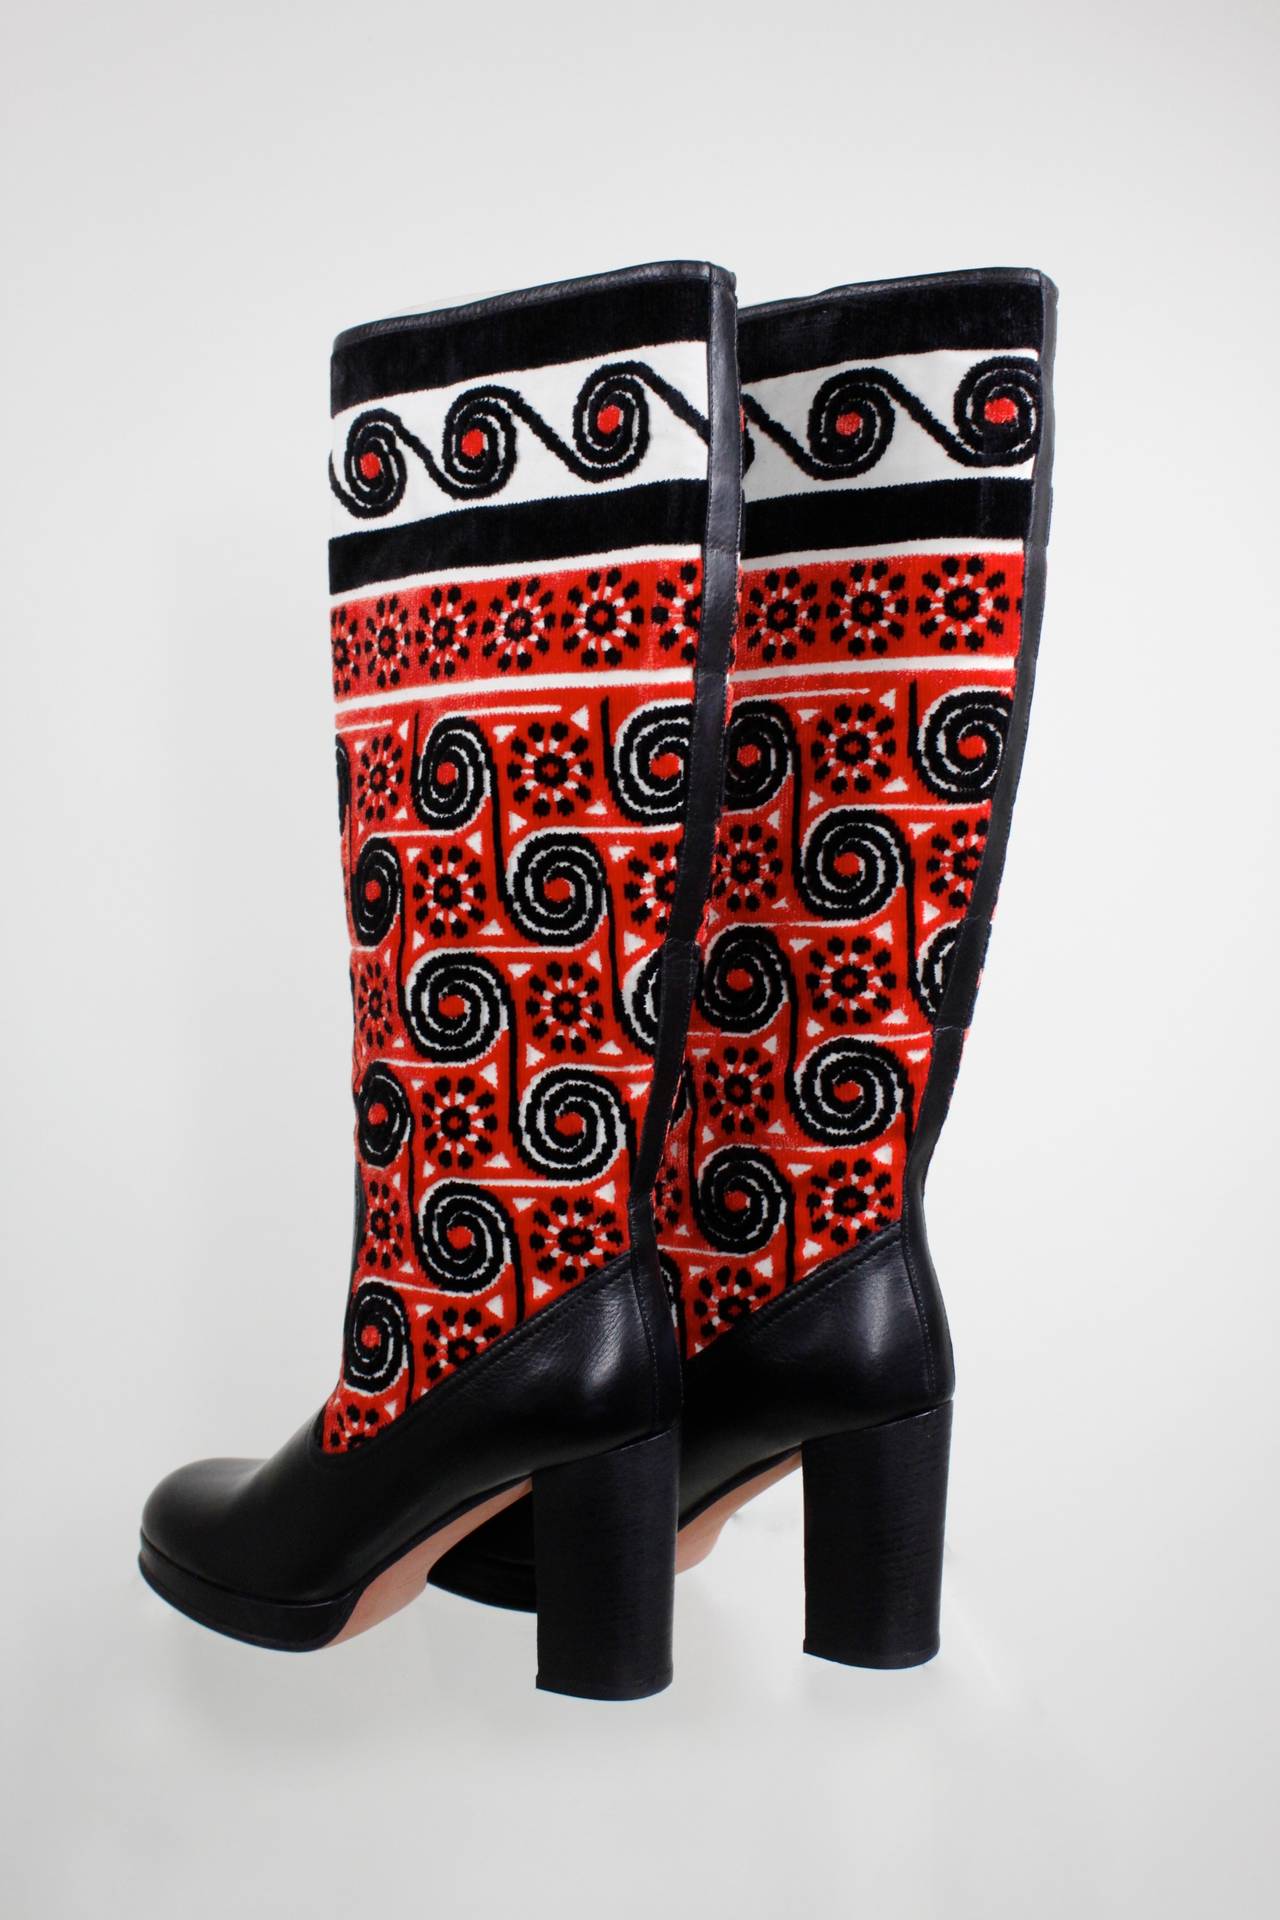 These fabulous black leather boots from Anna Sui feature a gorgeous, vibrant Eastern European chenille motif.

-Size 40
-3.75 inch heel
-No zip closure. Opening diameter is 15.5 inches. Ankle diameter is 12.5 inches.